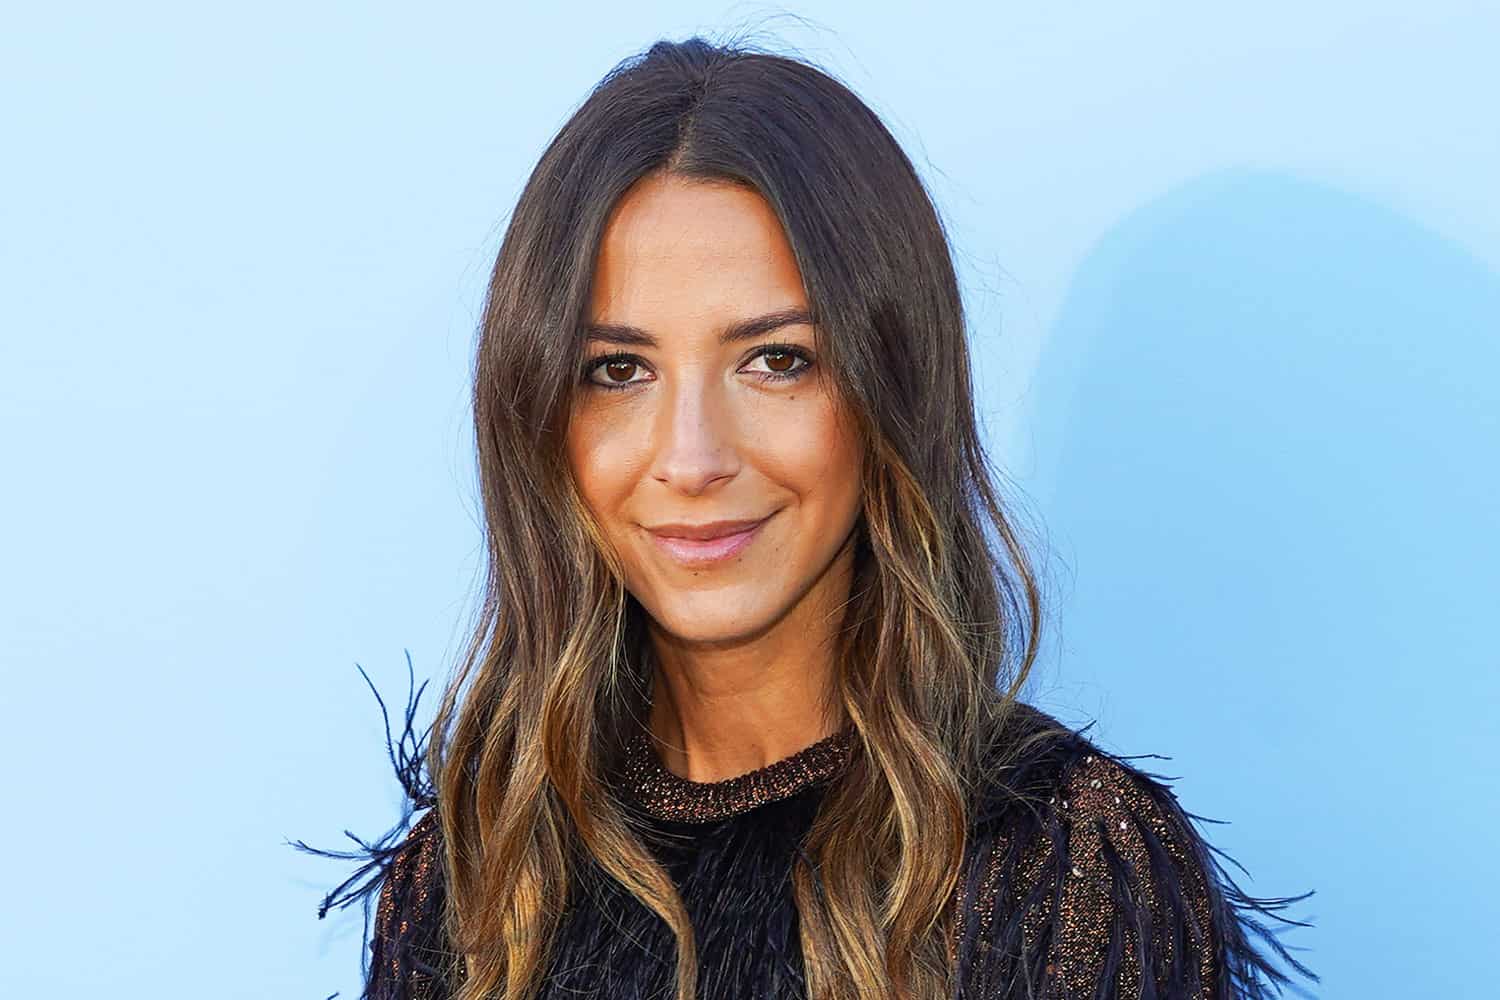 Did Arielle Charnas Buy a Bunch of New Followers This Week?